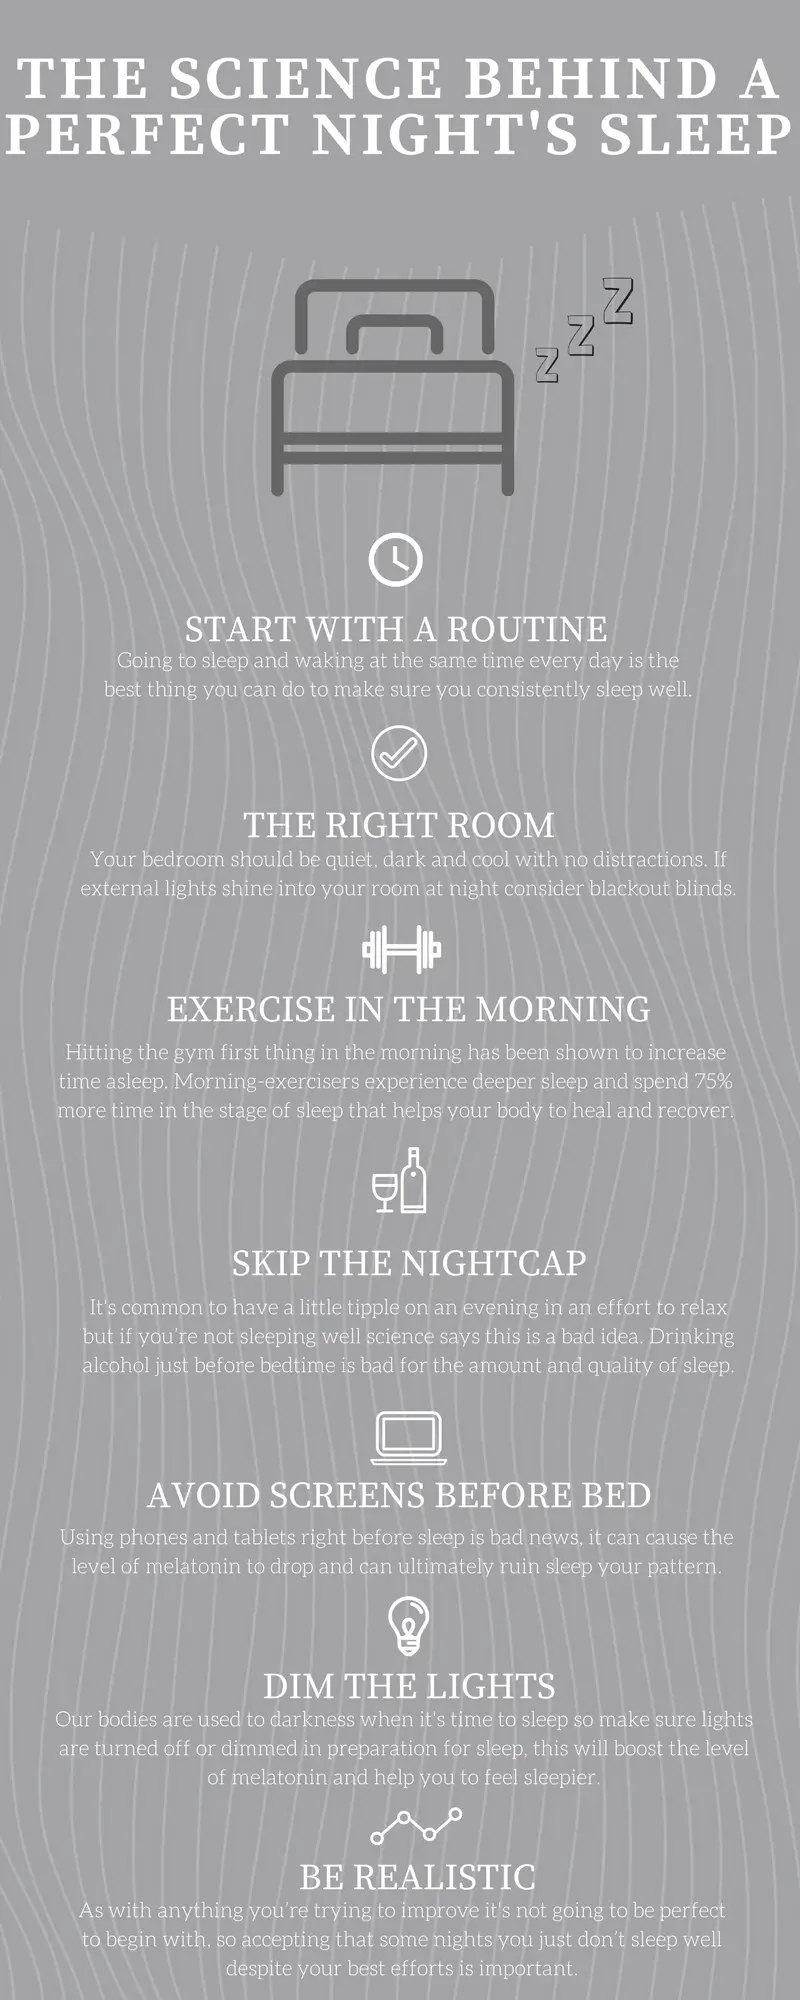  The Science Behind a Perfect Night’s Sleep - Infographic